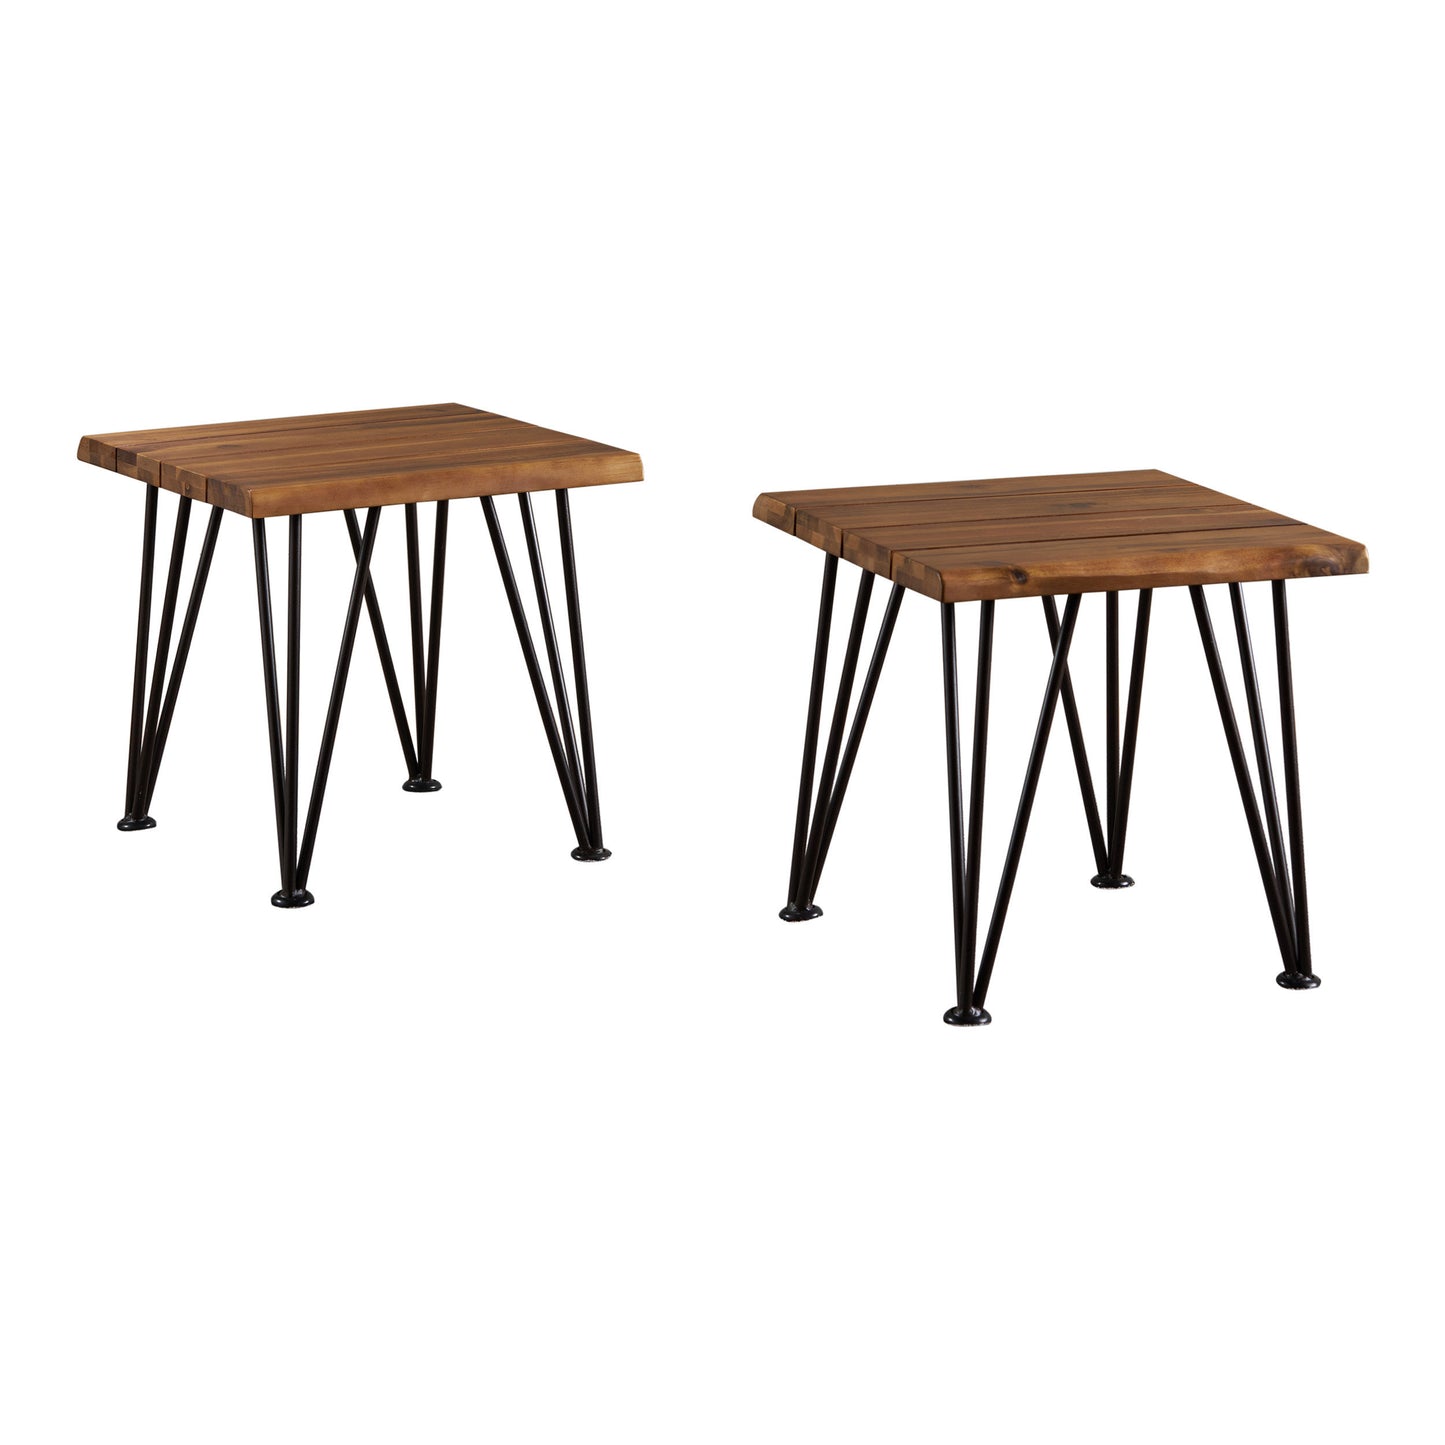 Avy Outdoor Rustic Industrial Acacia Wood Accent Table with Metal Hairpin Legs, Teak